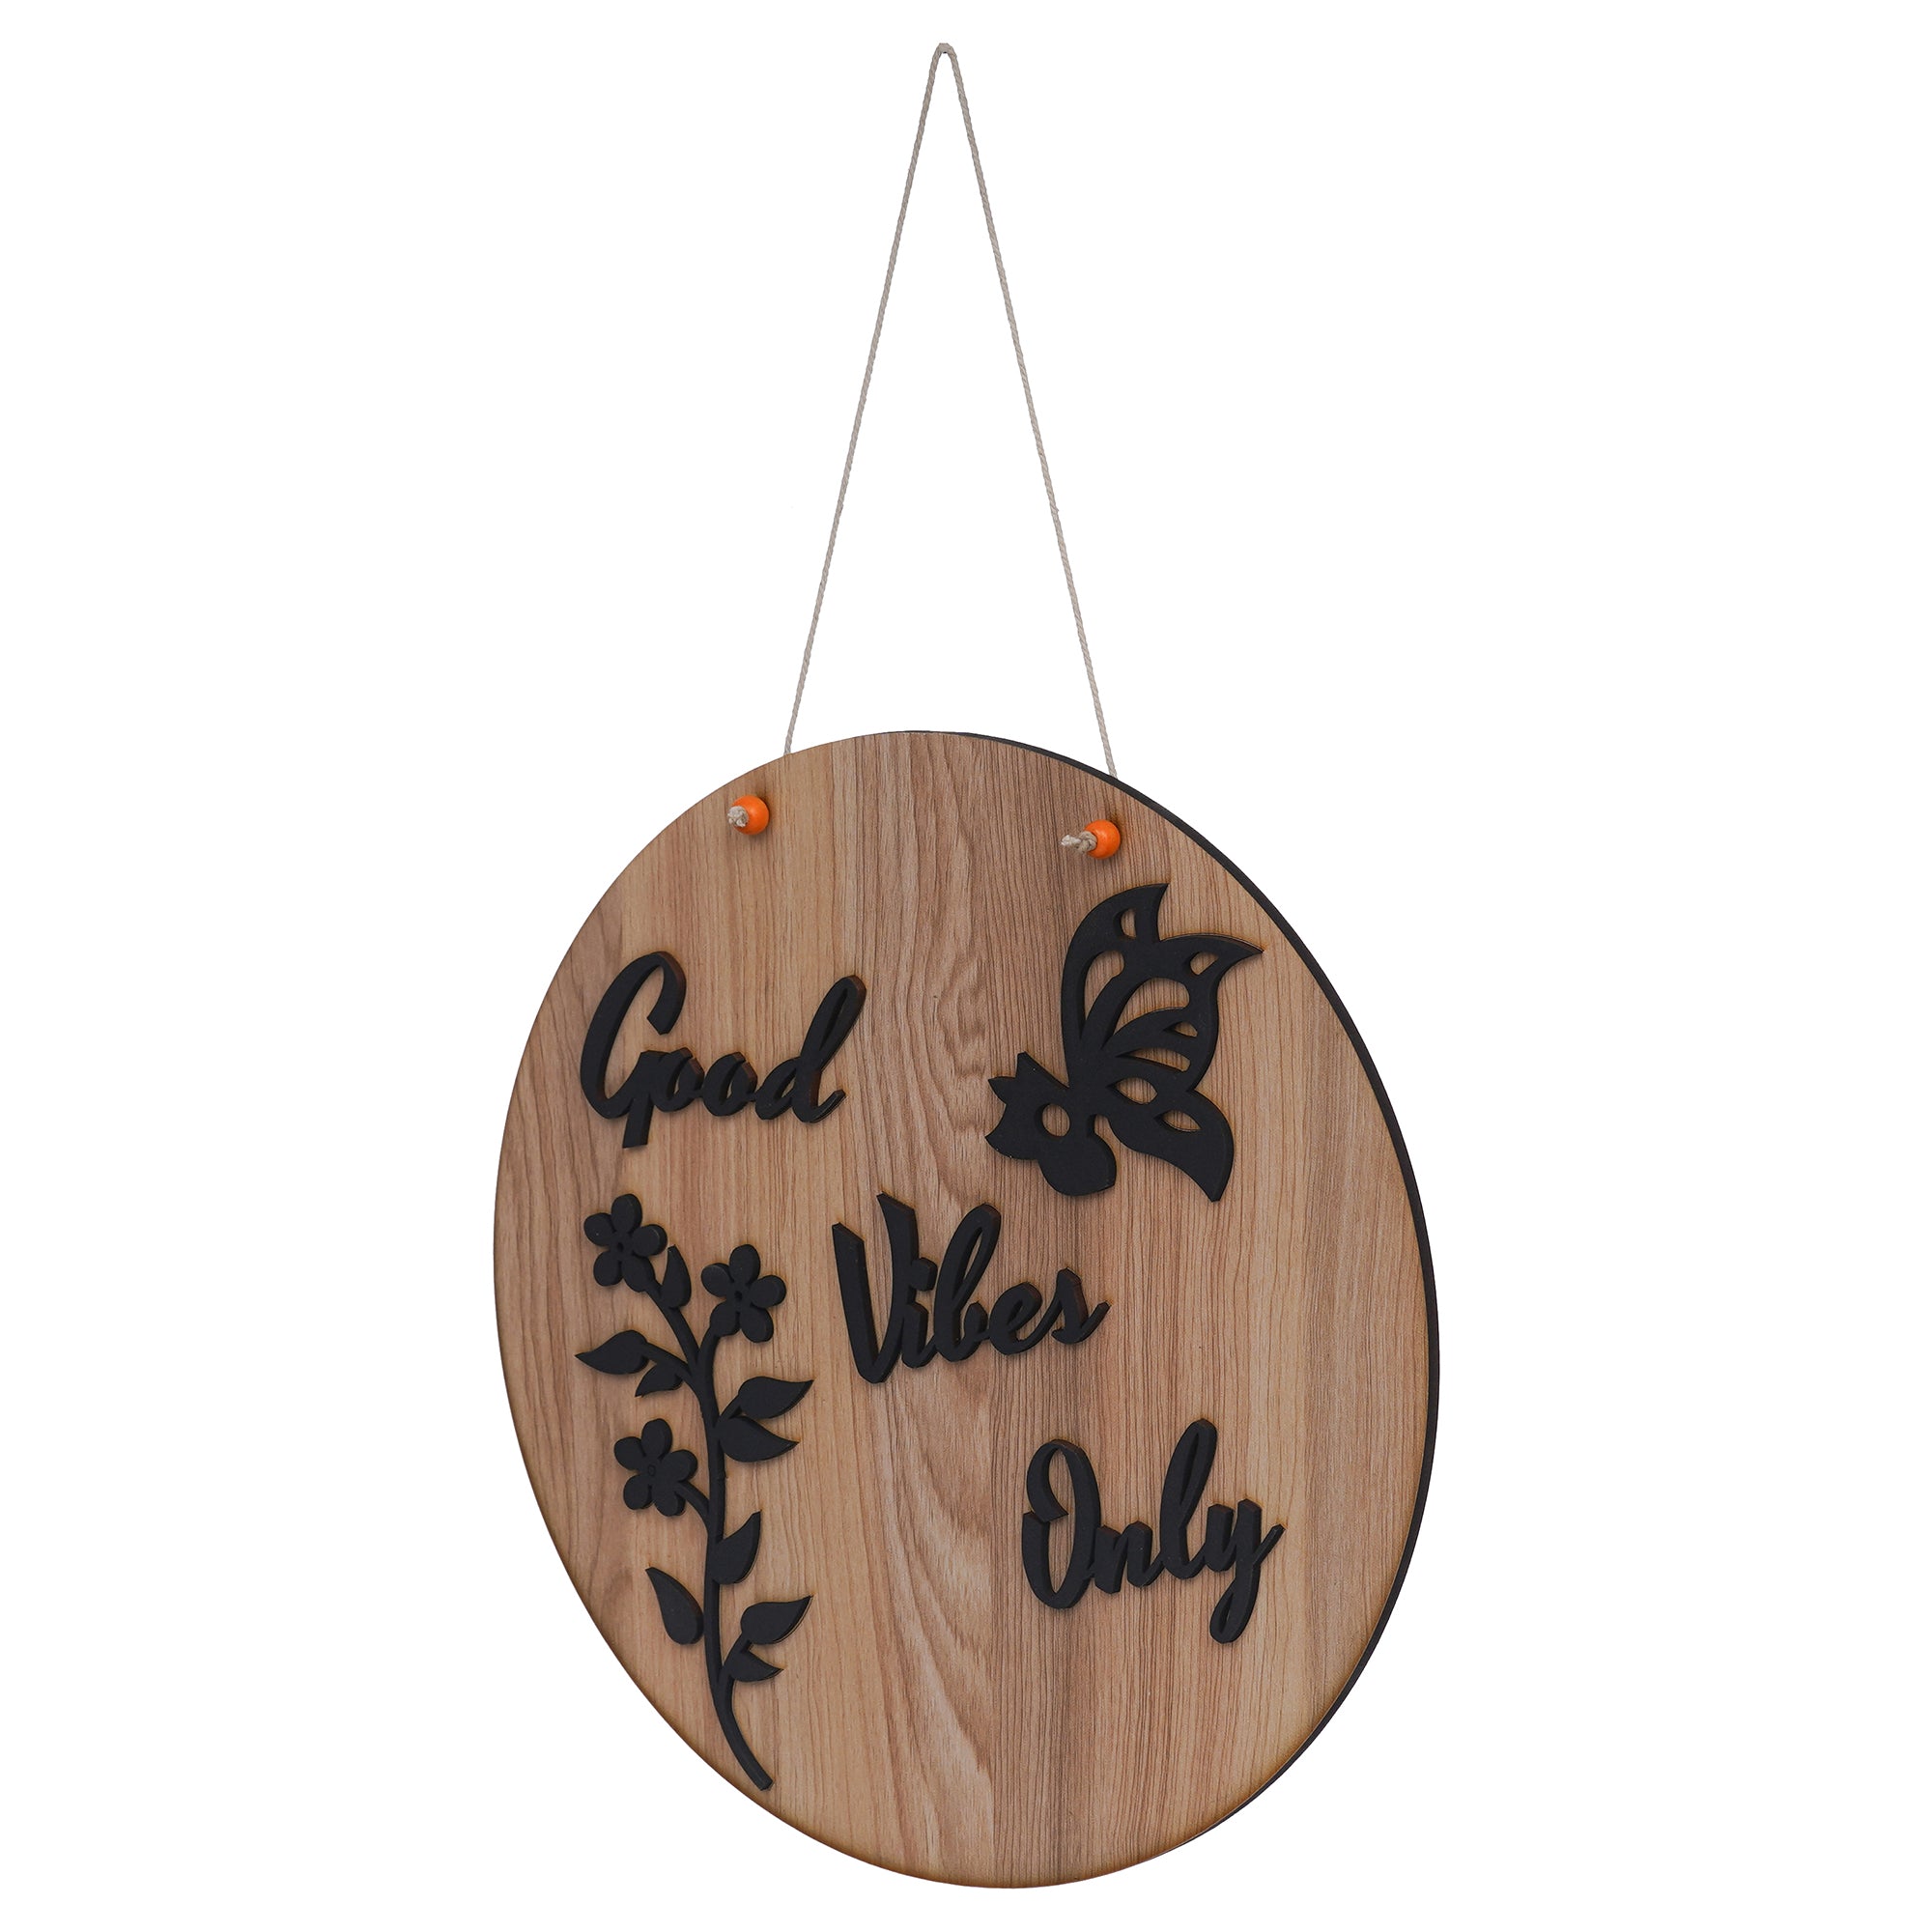 eCraftIndia Brown Wooden "Good Vibes Only" Butterfly & Floral Designer Wall Hanging Showpiece 5